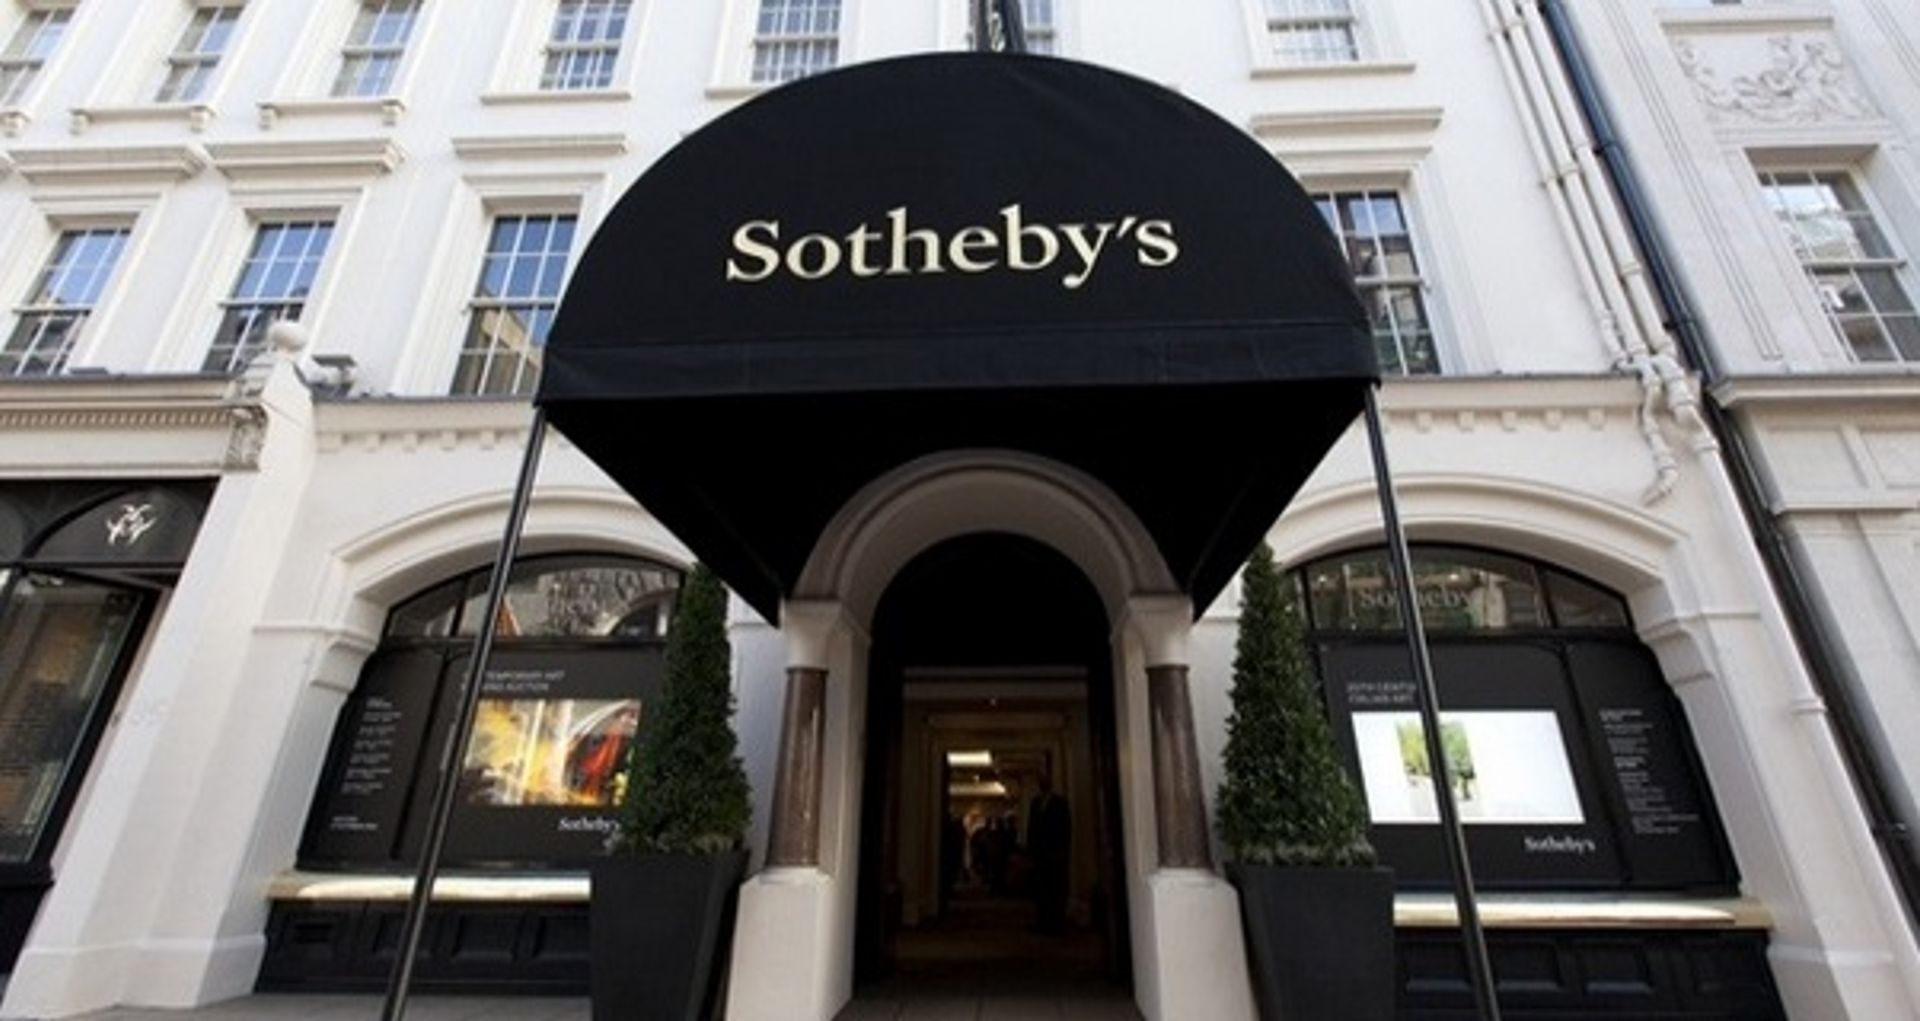 Sotheby’s is “actively preparing” for the reopening of its galleries in New York and London 